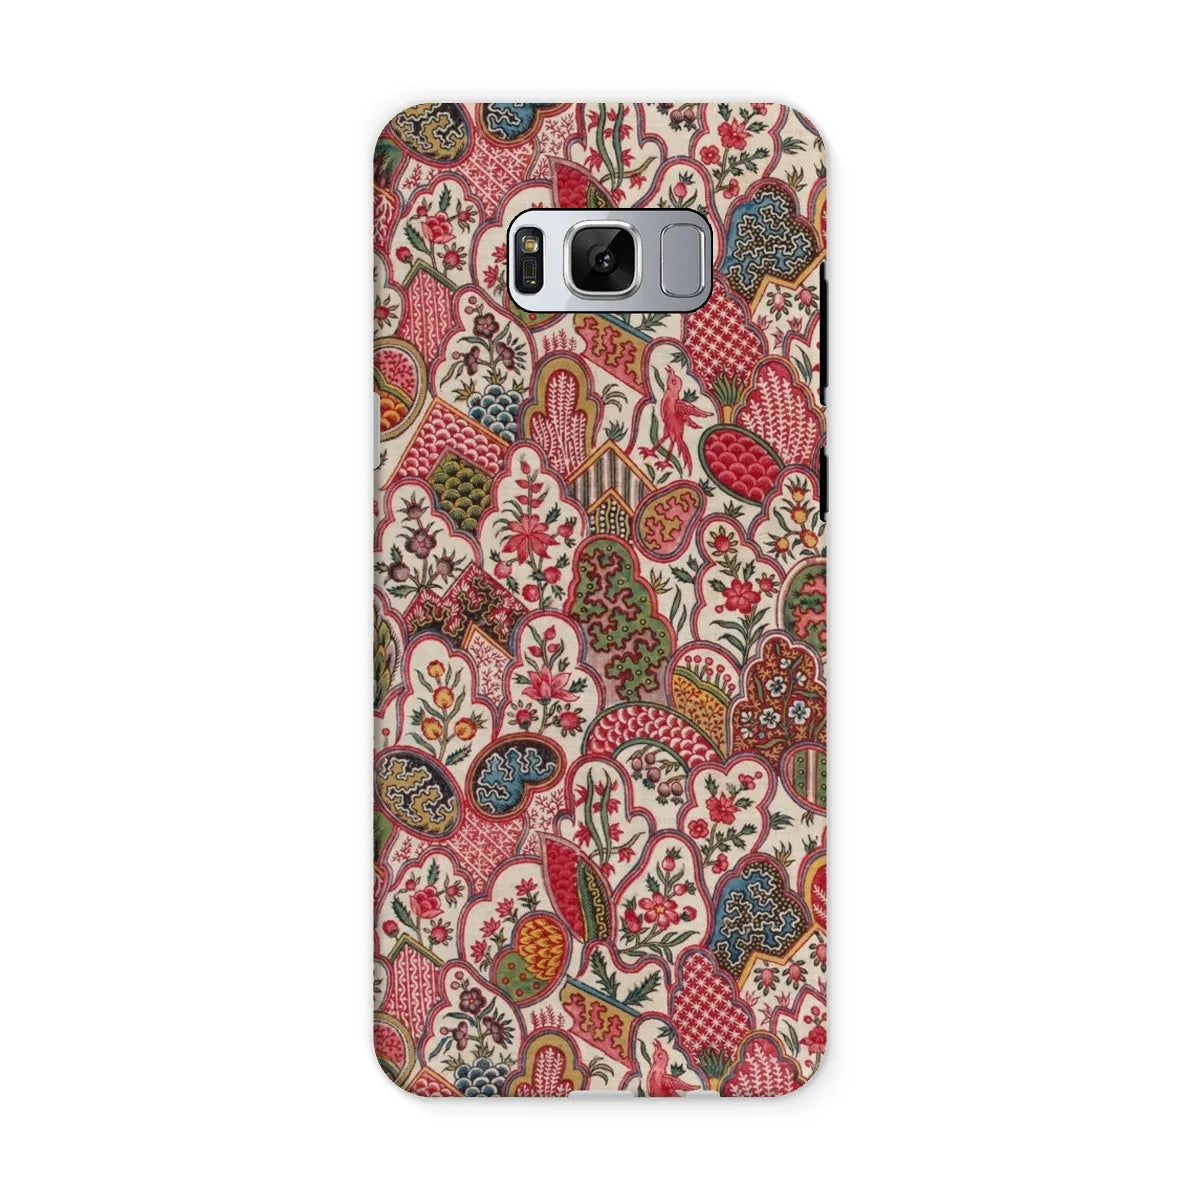 Oberkampf & Cie. Vintage Pattern Fabric - Art Phone Case - Samsung Galaxy S8 / Matte - Mobile Phone Cases - Aesthetic